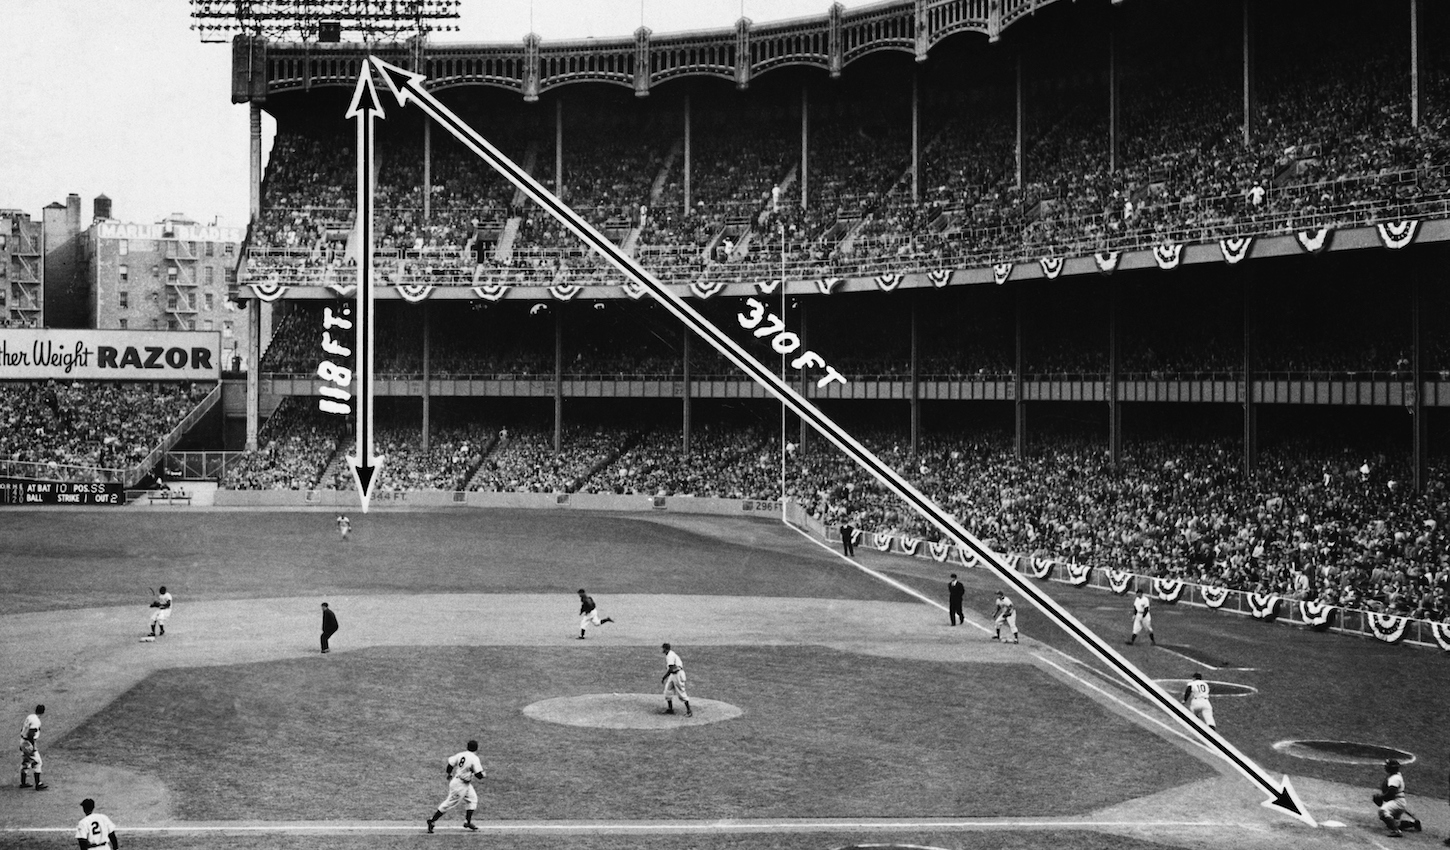 (Original Caption) New York, NY: Converging arrows show the spot where a prodigious home run blasted by Mickey Mantle landed, during the first game of the Yanks-Senators twin-bill at Yankee Stadium on May 30. The towering shot, traveling 370 feet, struck the facade of the right field roof, just a few feet from going out of the stadium. No one has ever hit a fair ball out of this ball park. Mantle's monumental clout, which hit the stands 118 feet above the ground, came with two men on base and sparked the Yanks to a 4-3 win over Washington.